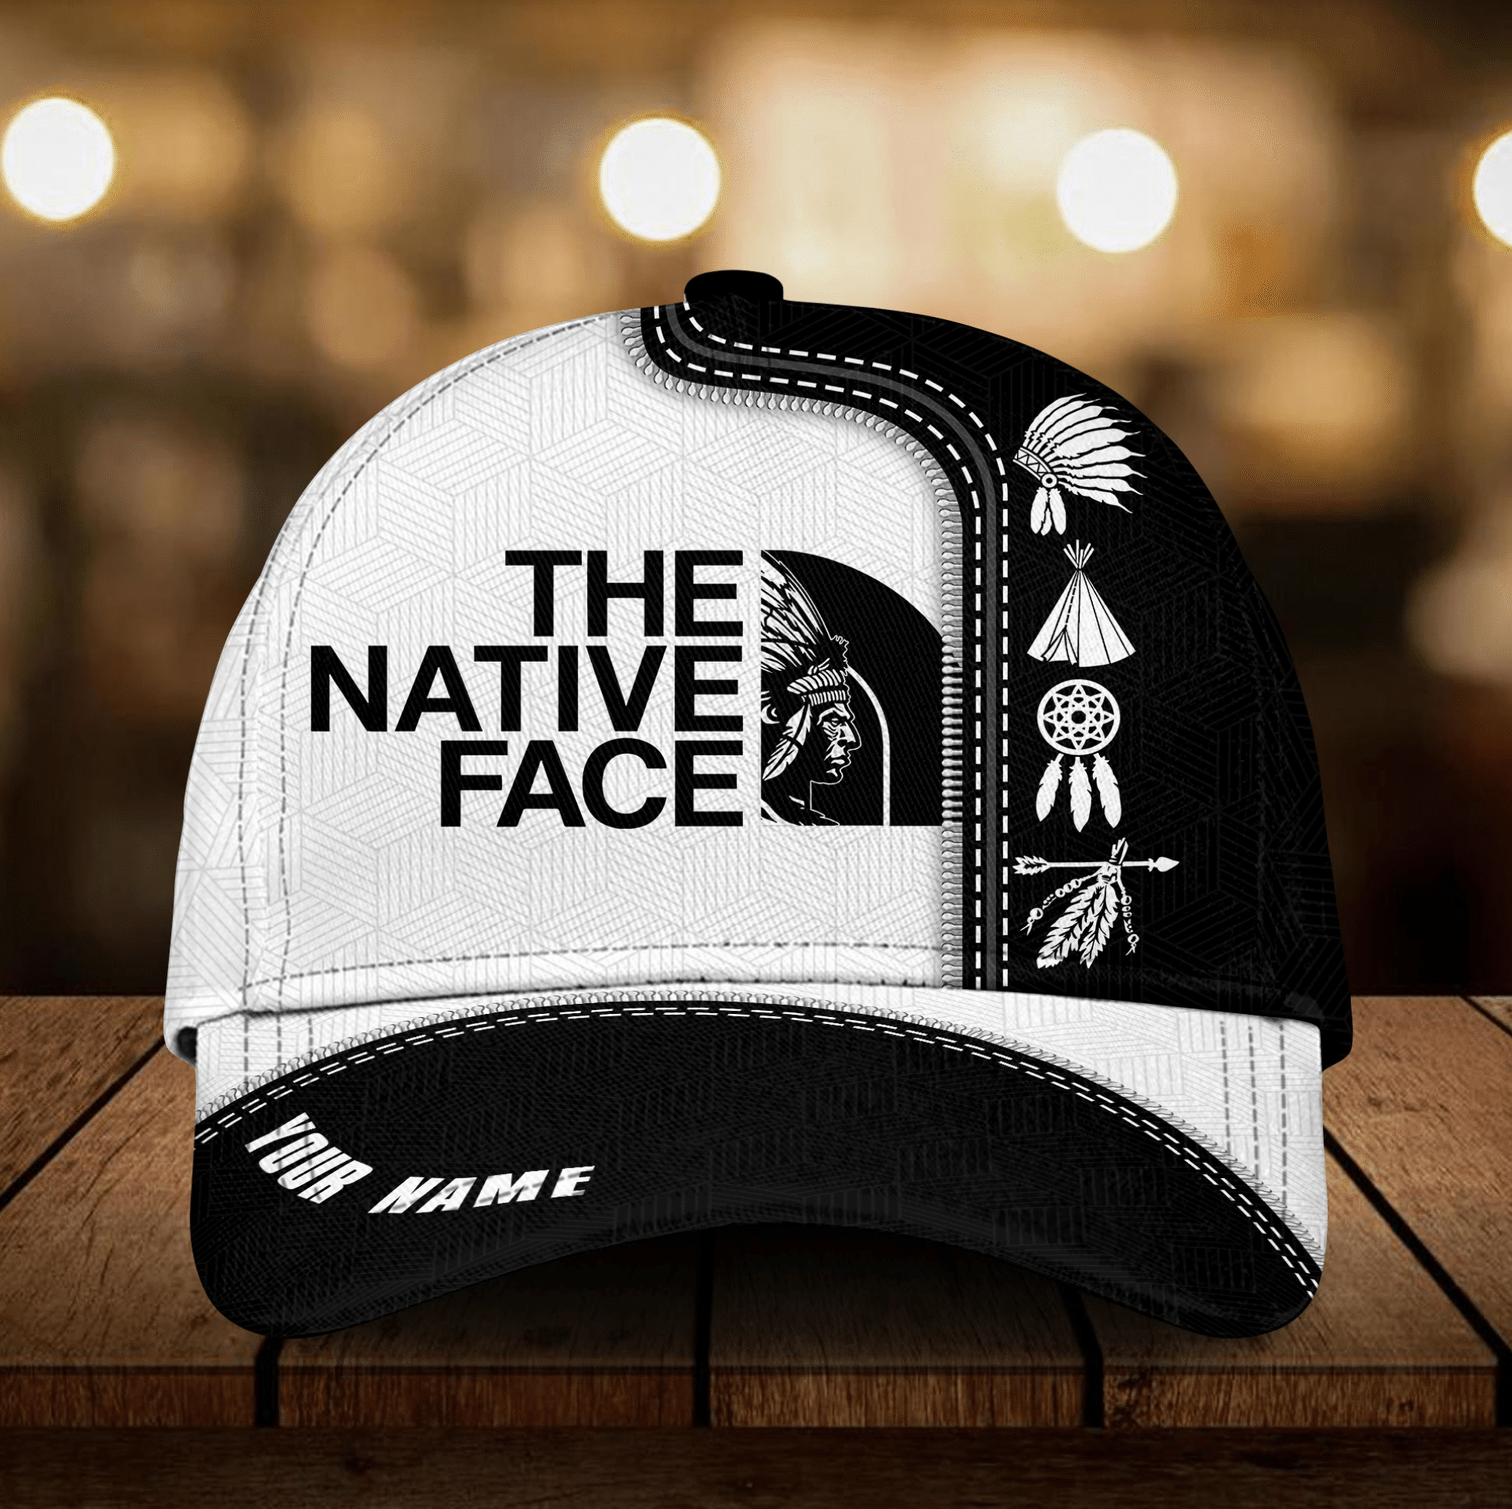 The Native face custom personalized cap hat